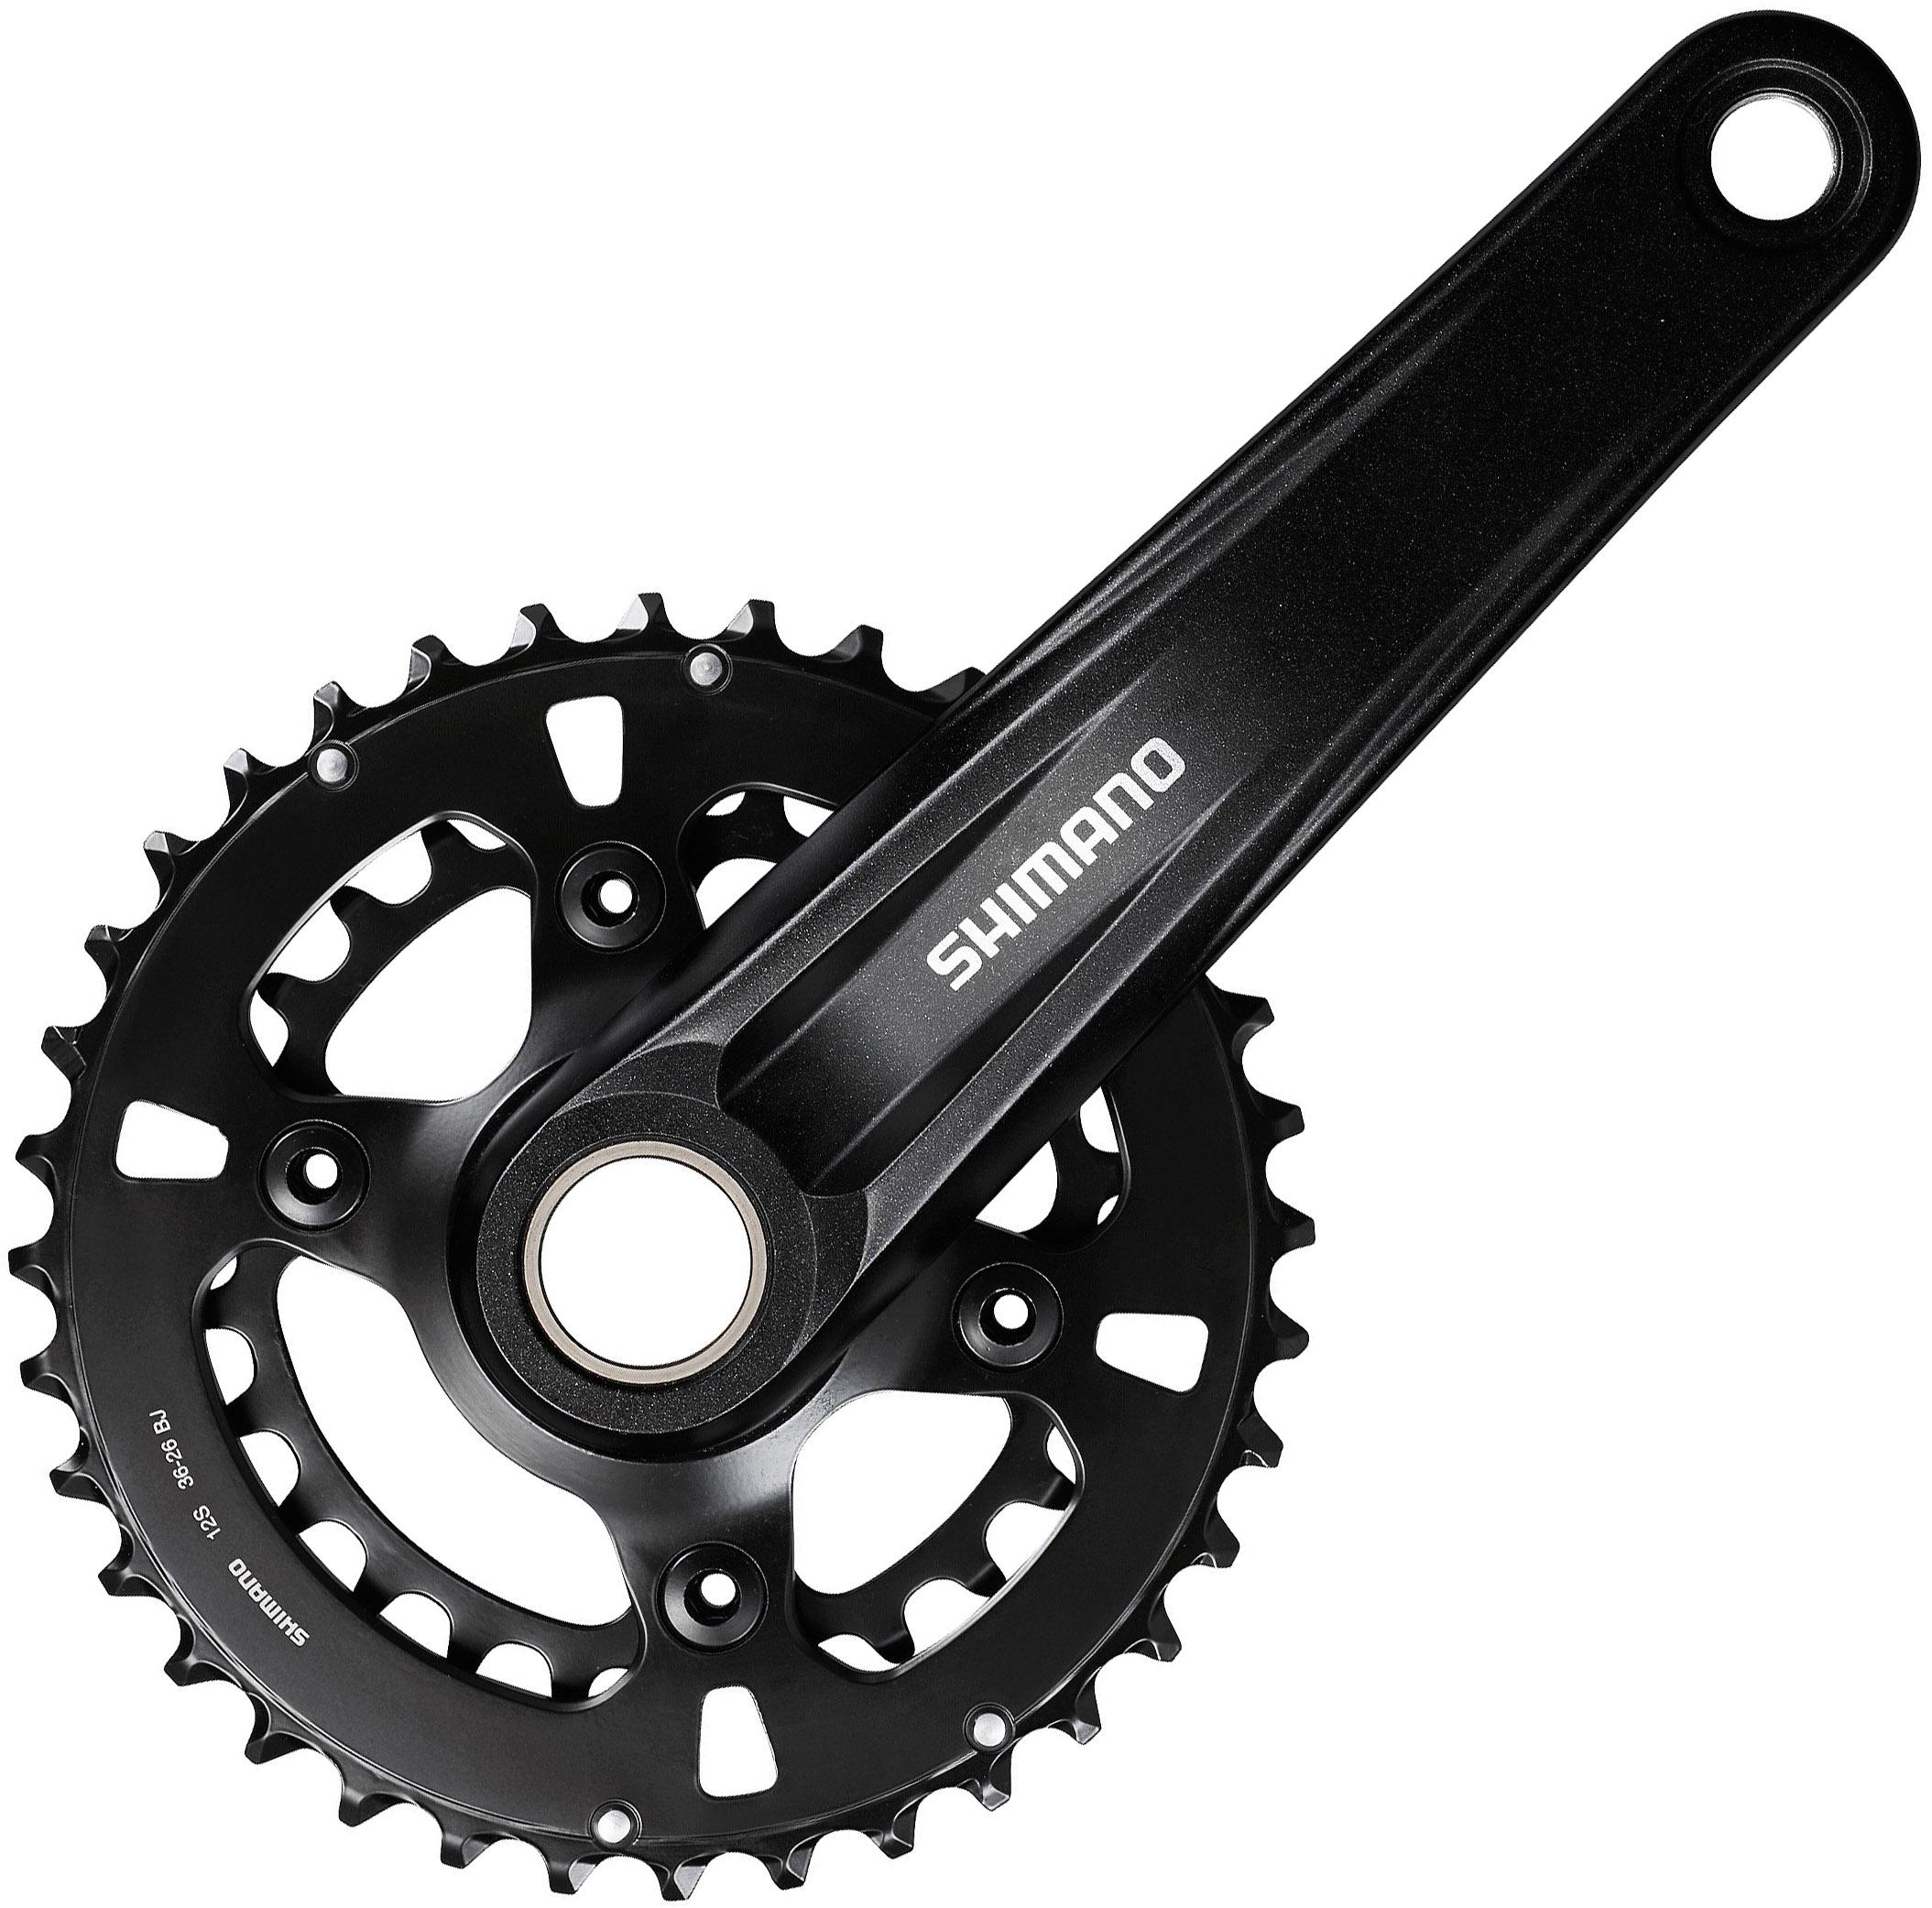 Shimano Mt610 12 Speed Boost Double Chainset - Black